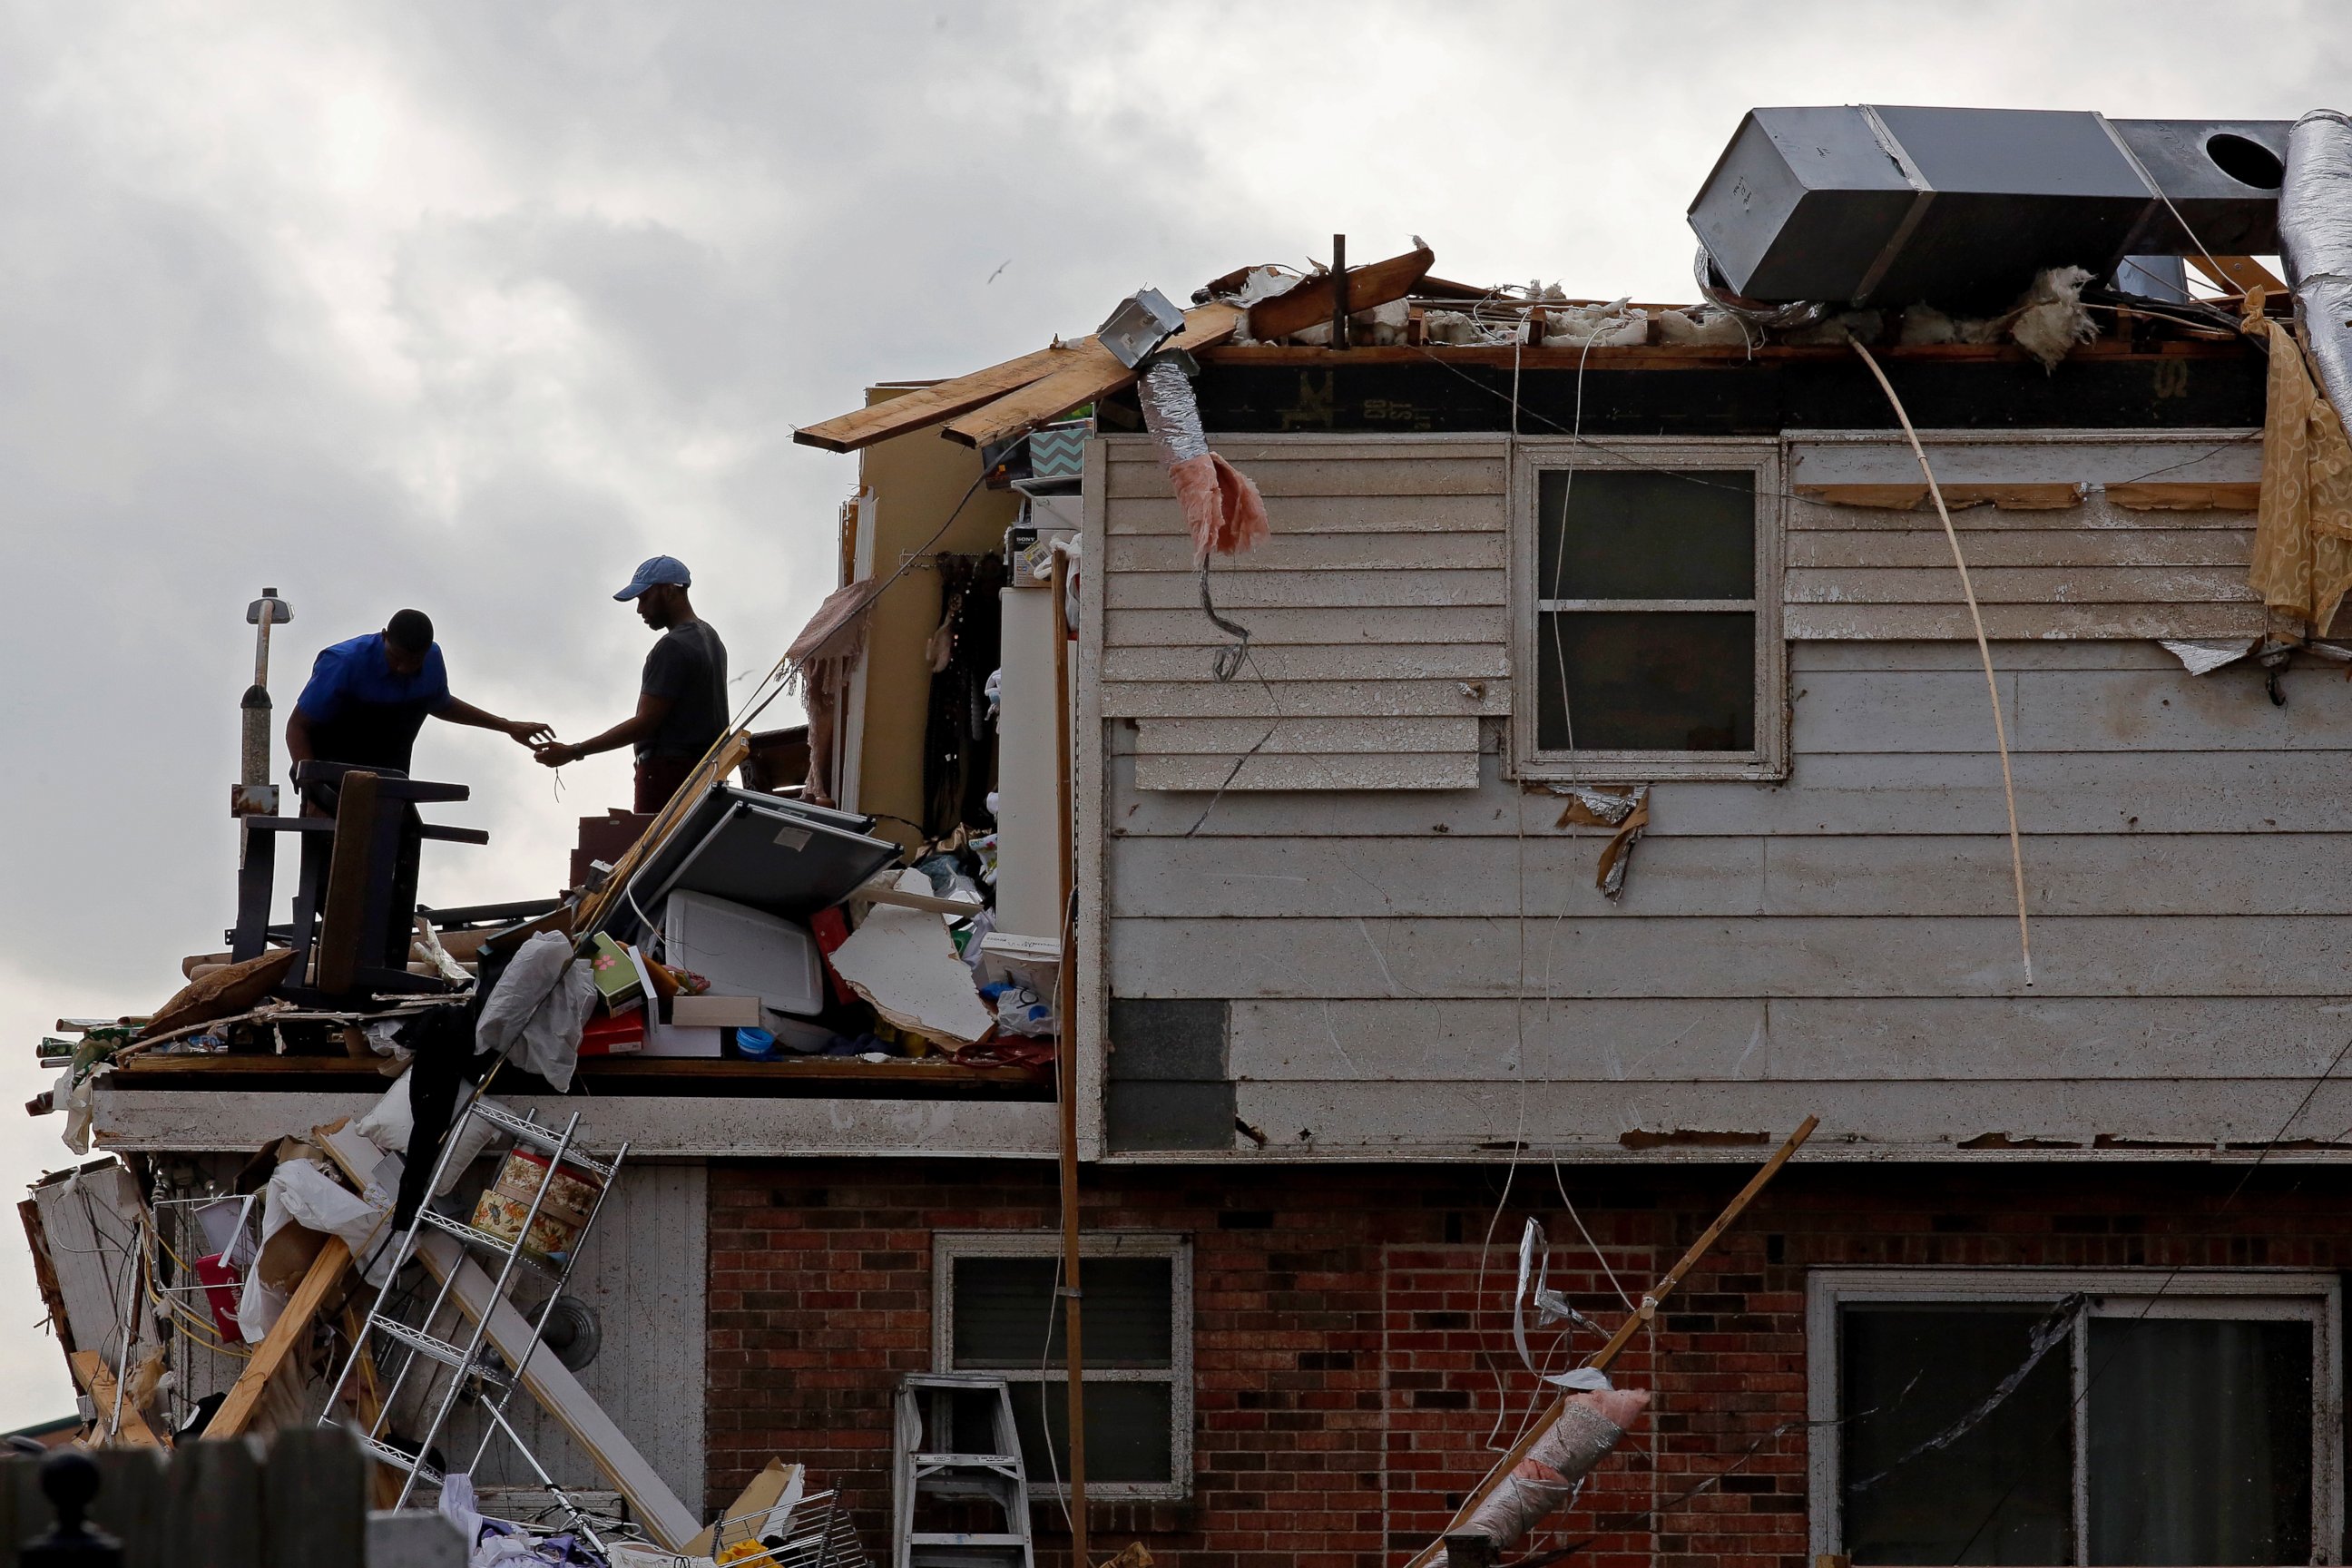 PHOTO: Personal belongings are salvaged from a tornado damaged home in East New Orleans, Louisiana after a tornado touched down leaving many homeless, February 7, 2017. 